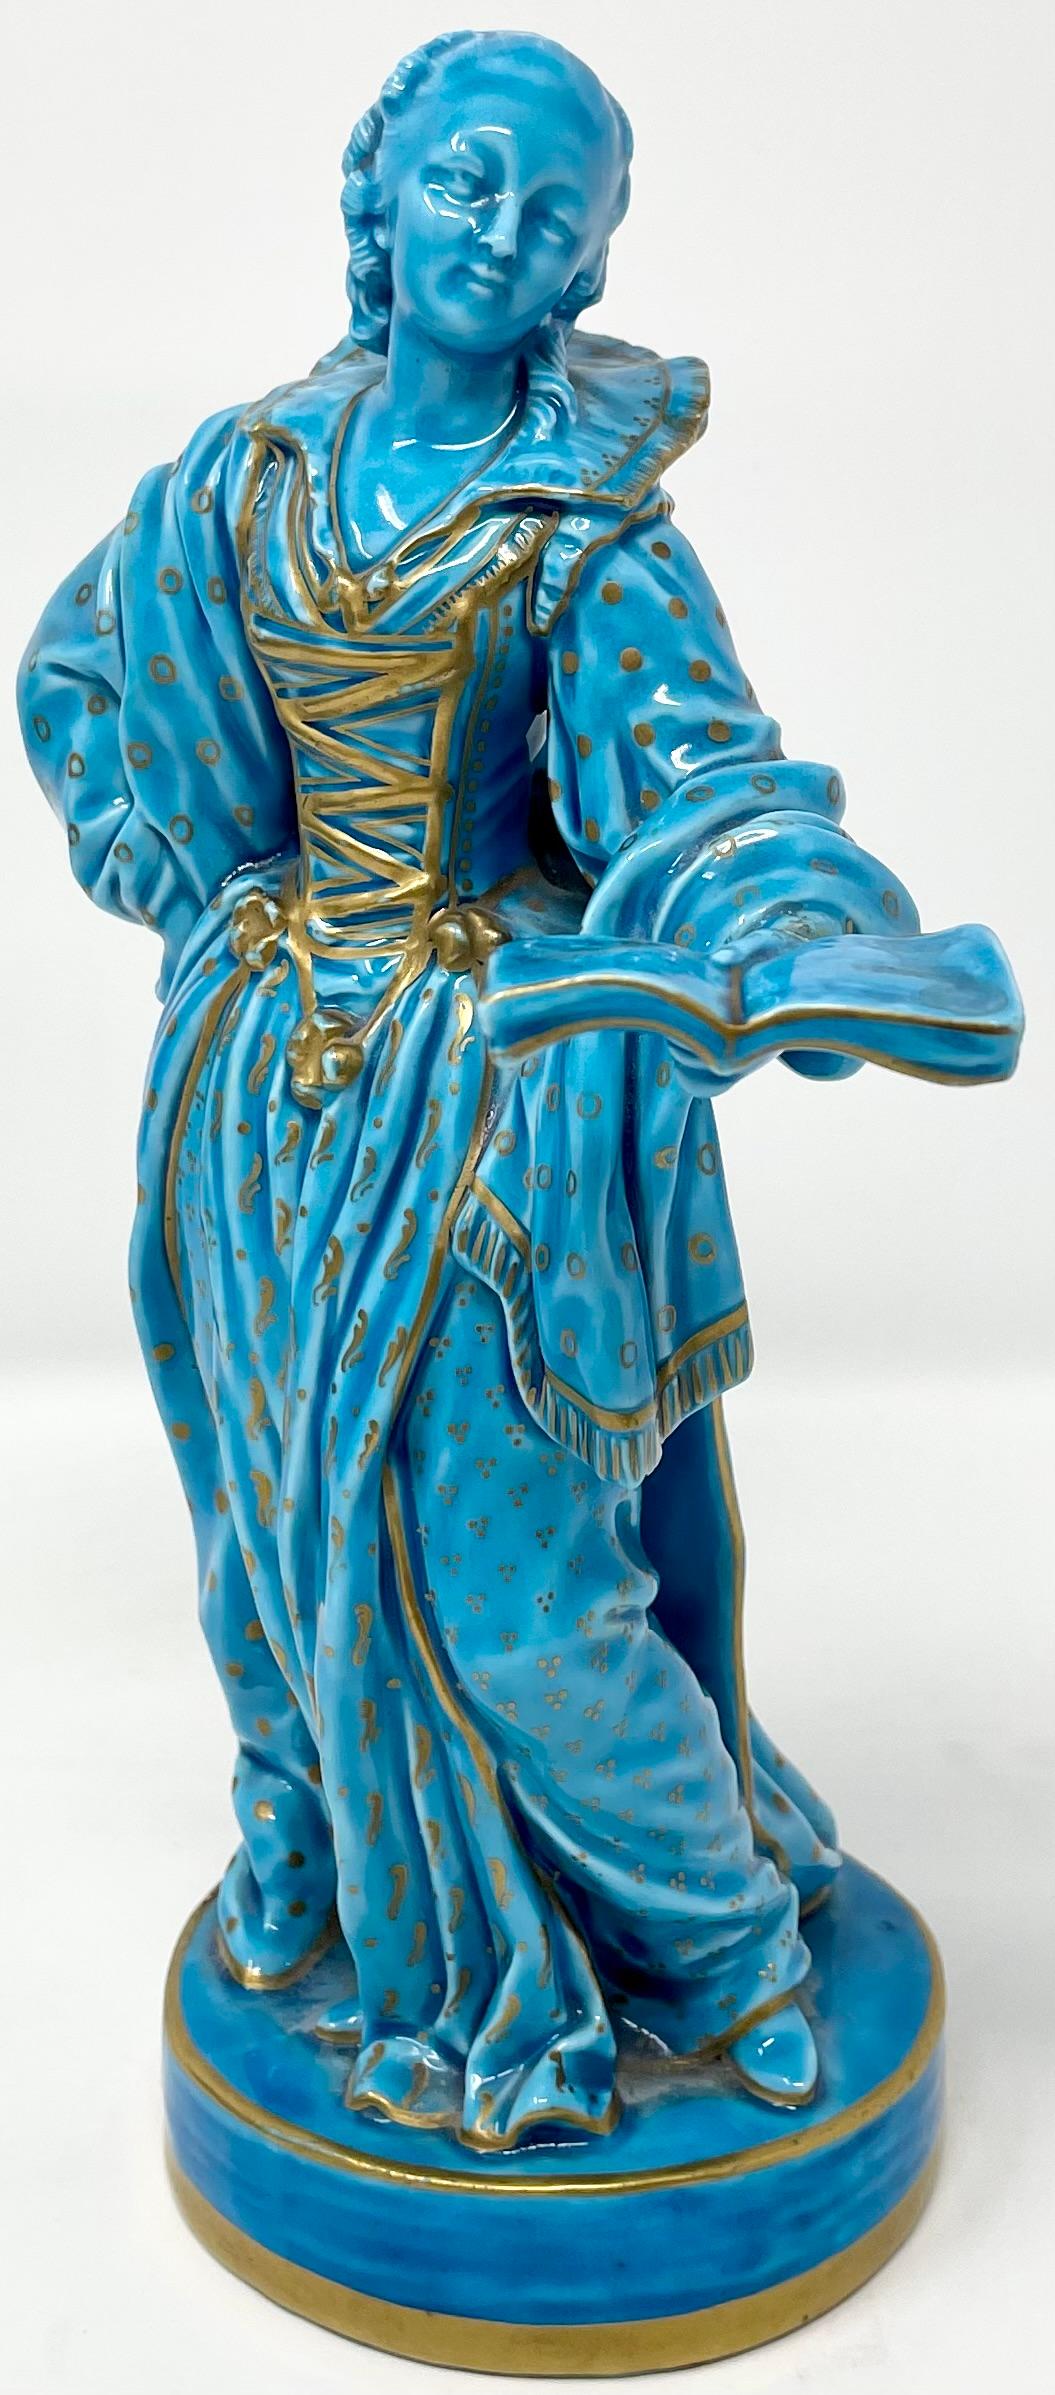 Set of 4 Antique French Porcelain Turquoise & Gold Table Figurines, Circa 1880. For Sale 11